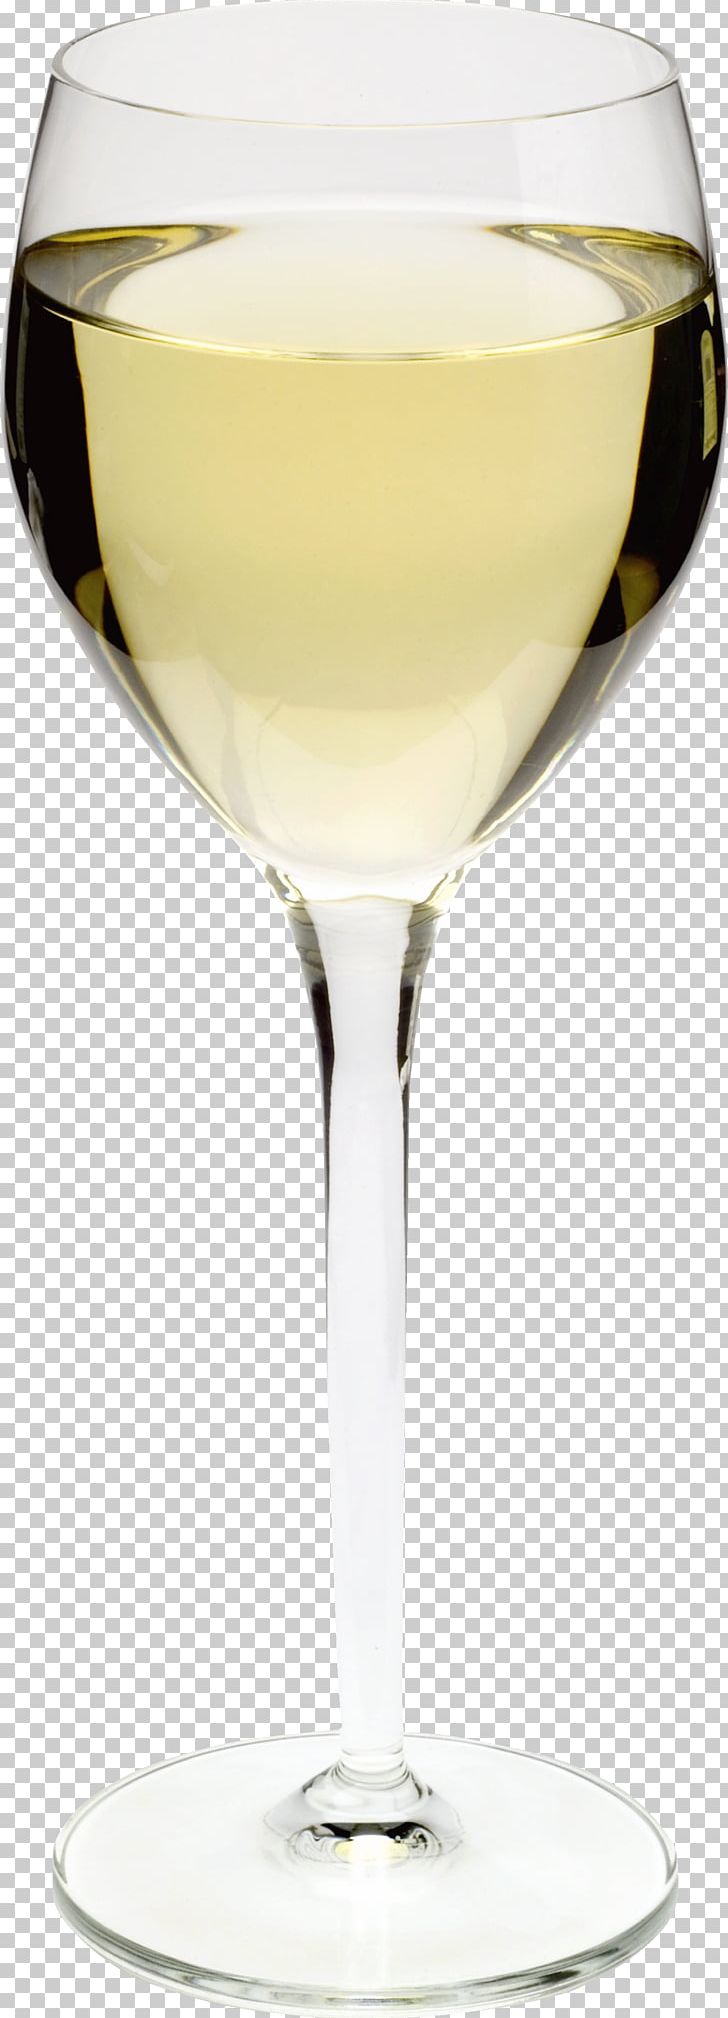 Wine Cocktail Wine Glass Champagne Cocktail White Wine PNG, Clipart, Alcoholic Beverage, Champagne Cocktail, Champagne Glass, Champagne Stemware, Classic Cocktail Free PNG Download